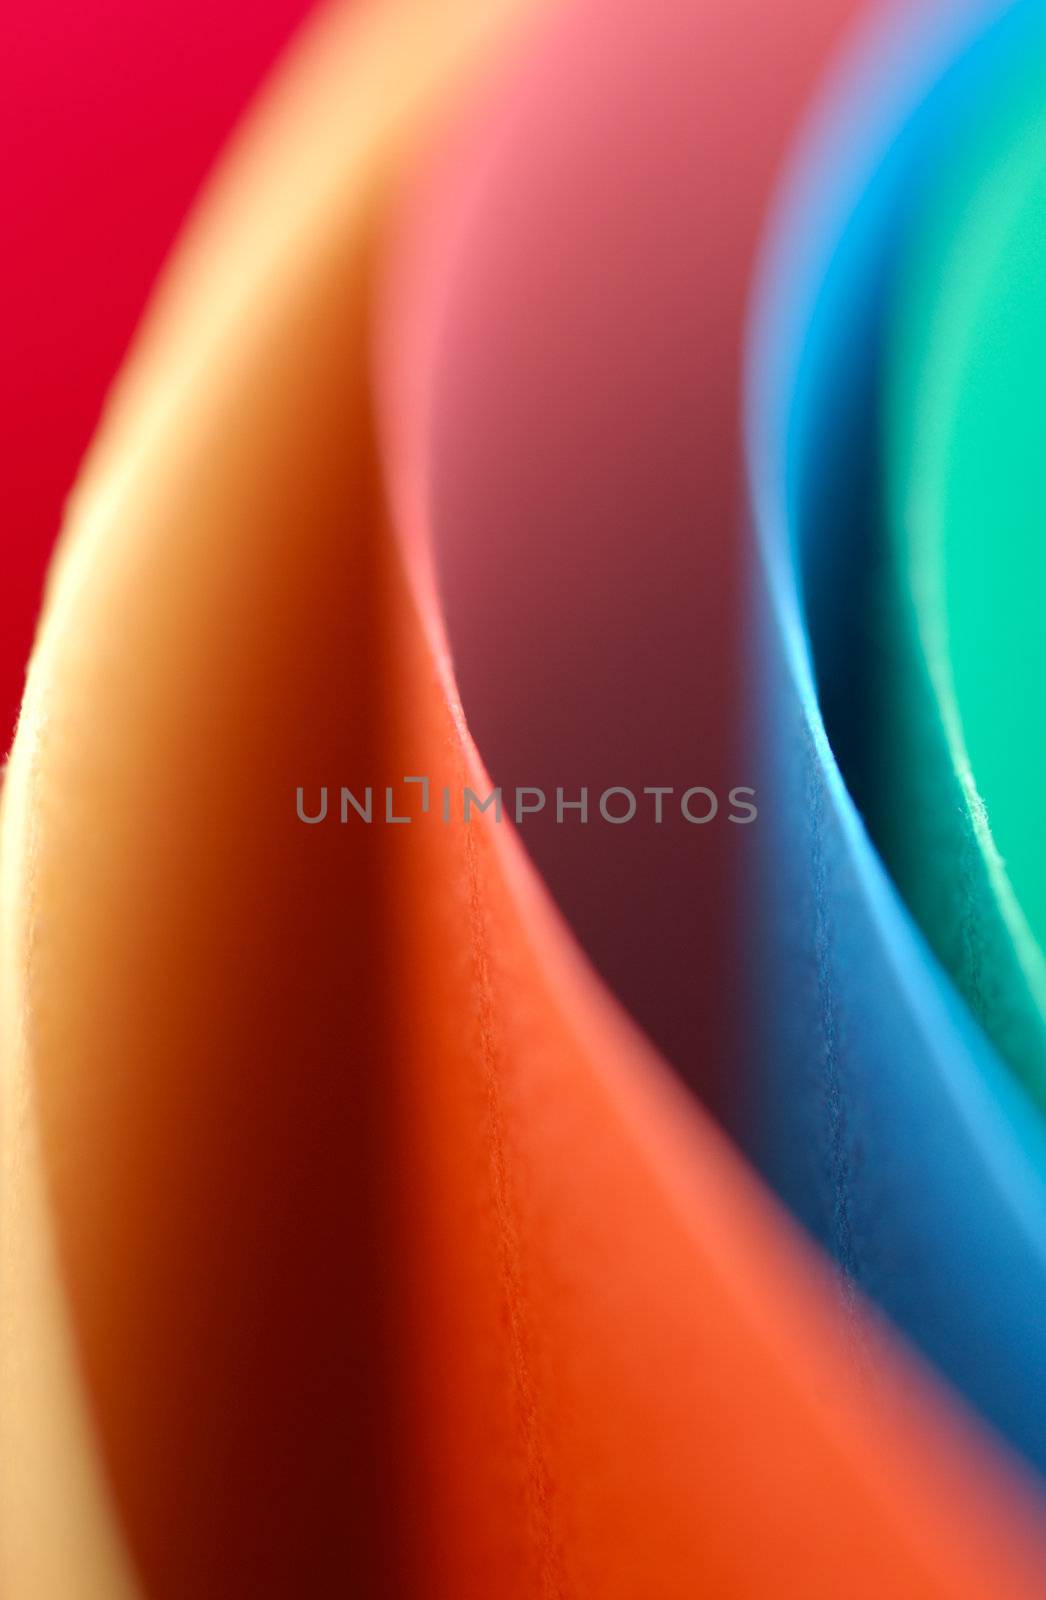 Abstract image created from coloured pieces of board and shot with a shallow depth of field